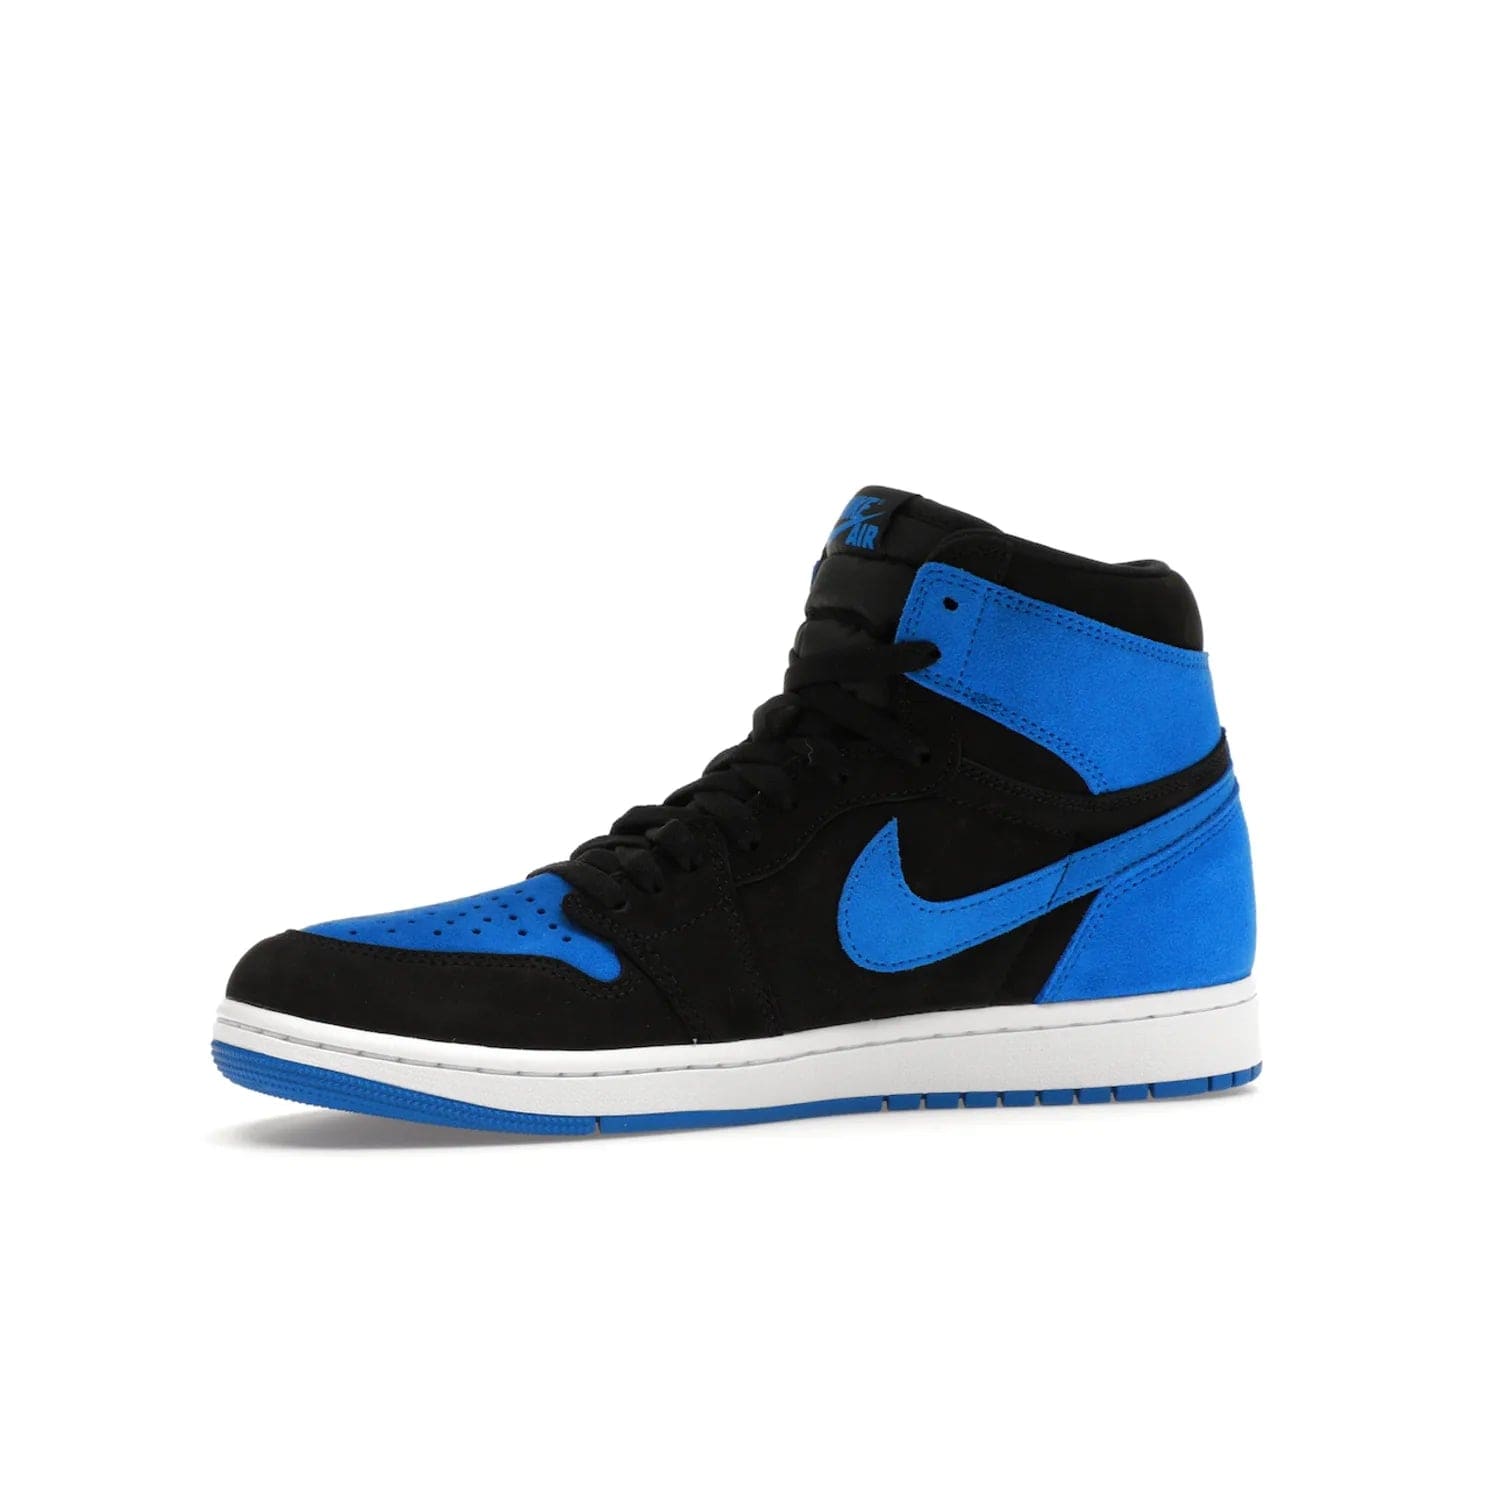 Jordan 1 Retro High OG Royal Reimagined - Image 17 - Only at www.BallersClubKickz.com - ####
Old meets the new: Jordan 1 Retro High OG 'Royal Reimagined' is a bold statement of evolution with its royal blue and black suede material makeup. Swoosh overlays, Wings logos, padded ankle collars and Nike Air tags maintain the OG's legendary lineage. Get a pair on November 4th and be part of a fearless, unyielding story.